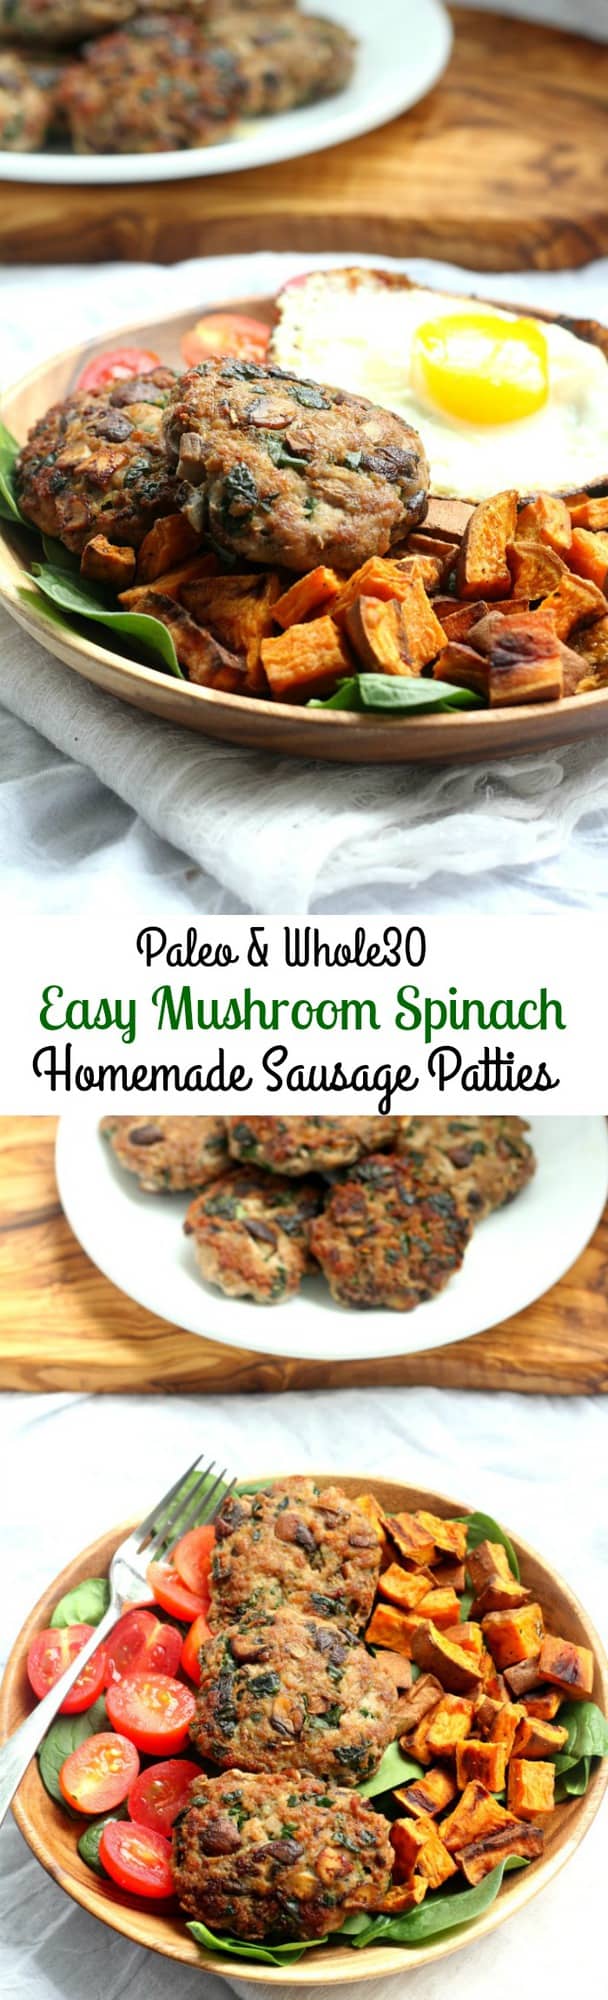 Mushroom Spinach Easy Homemade Pork Sausage Patties that are Paleo and Whole30 friendly #ad #Blenditarian #CG